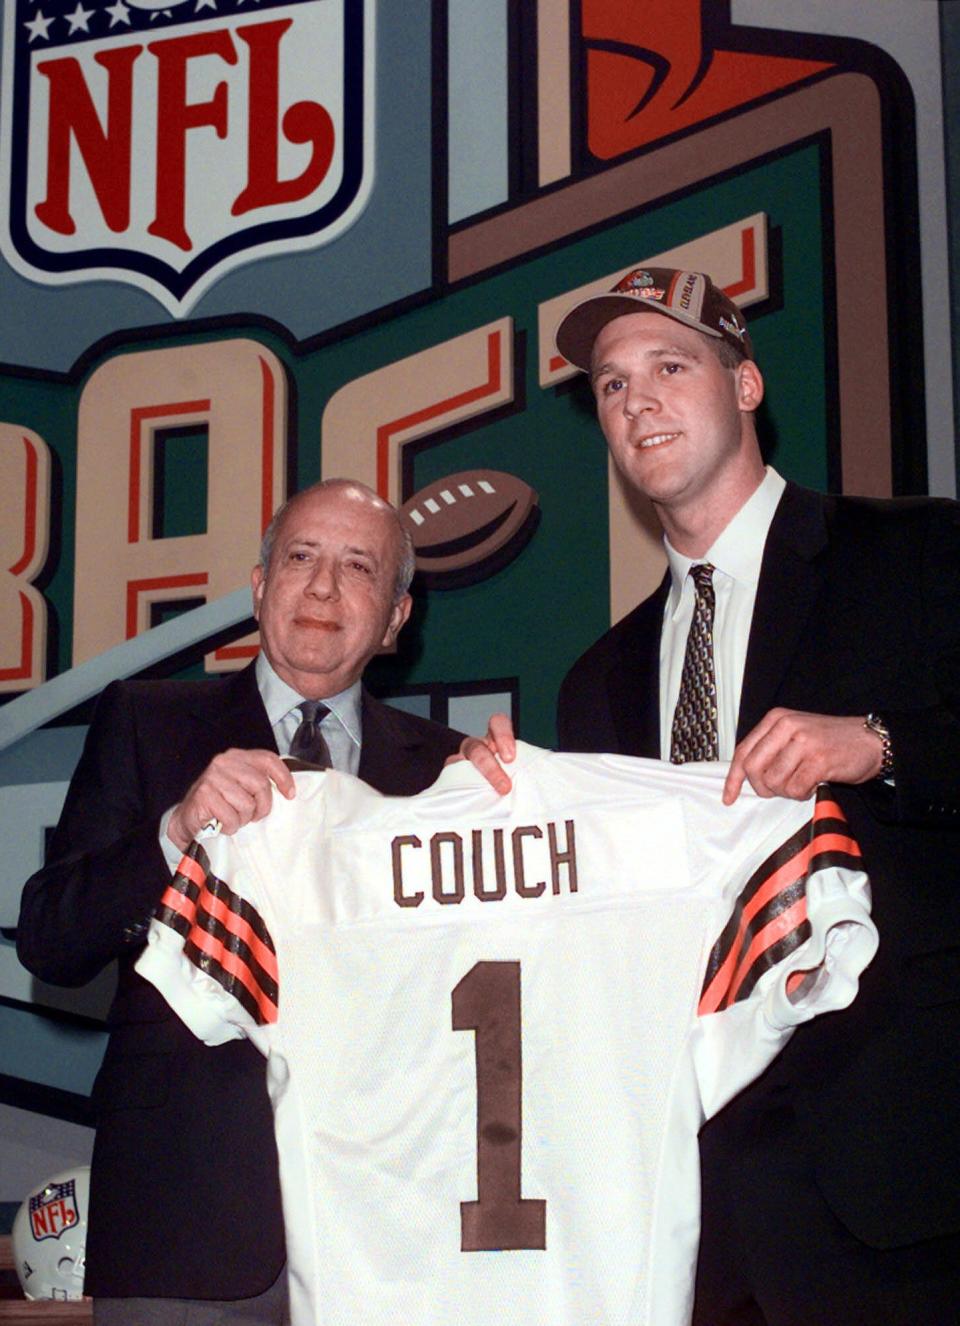 Former Kentucky quarterback Tim Couch, right, poses with Cleveland Browns owner Al Lerner after the Browns made him the No. 1 pick overall in the NFL draft in New York on April 17, 1999.